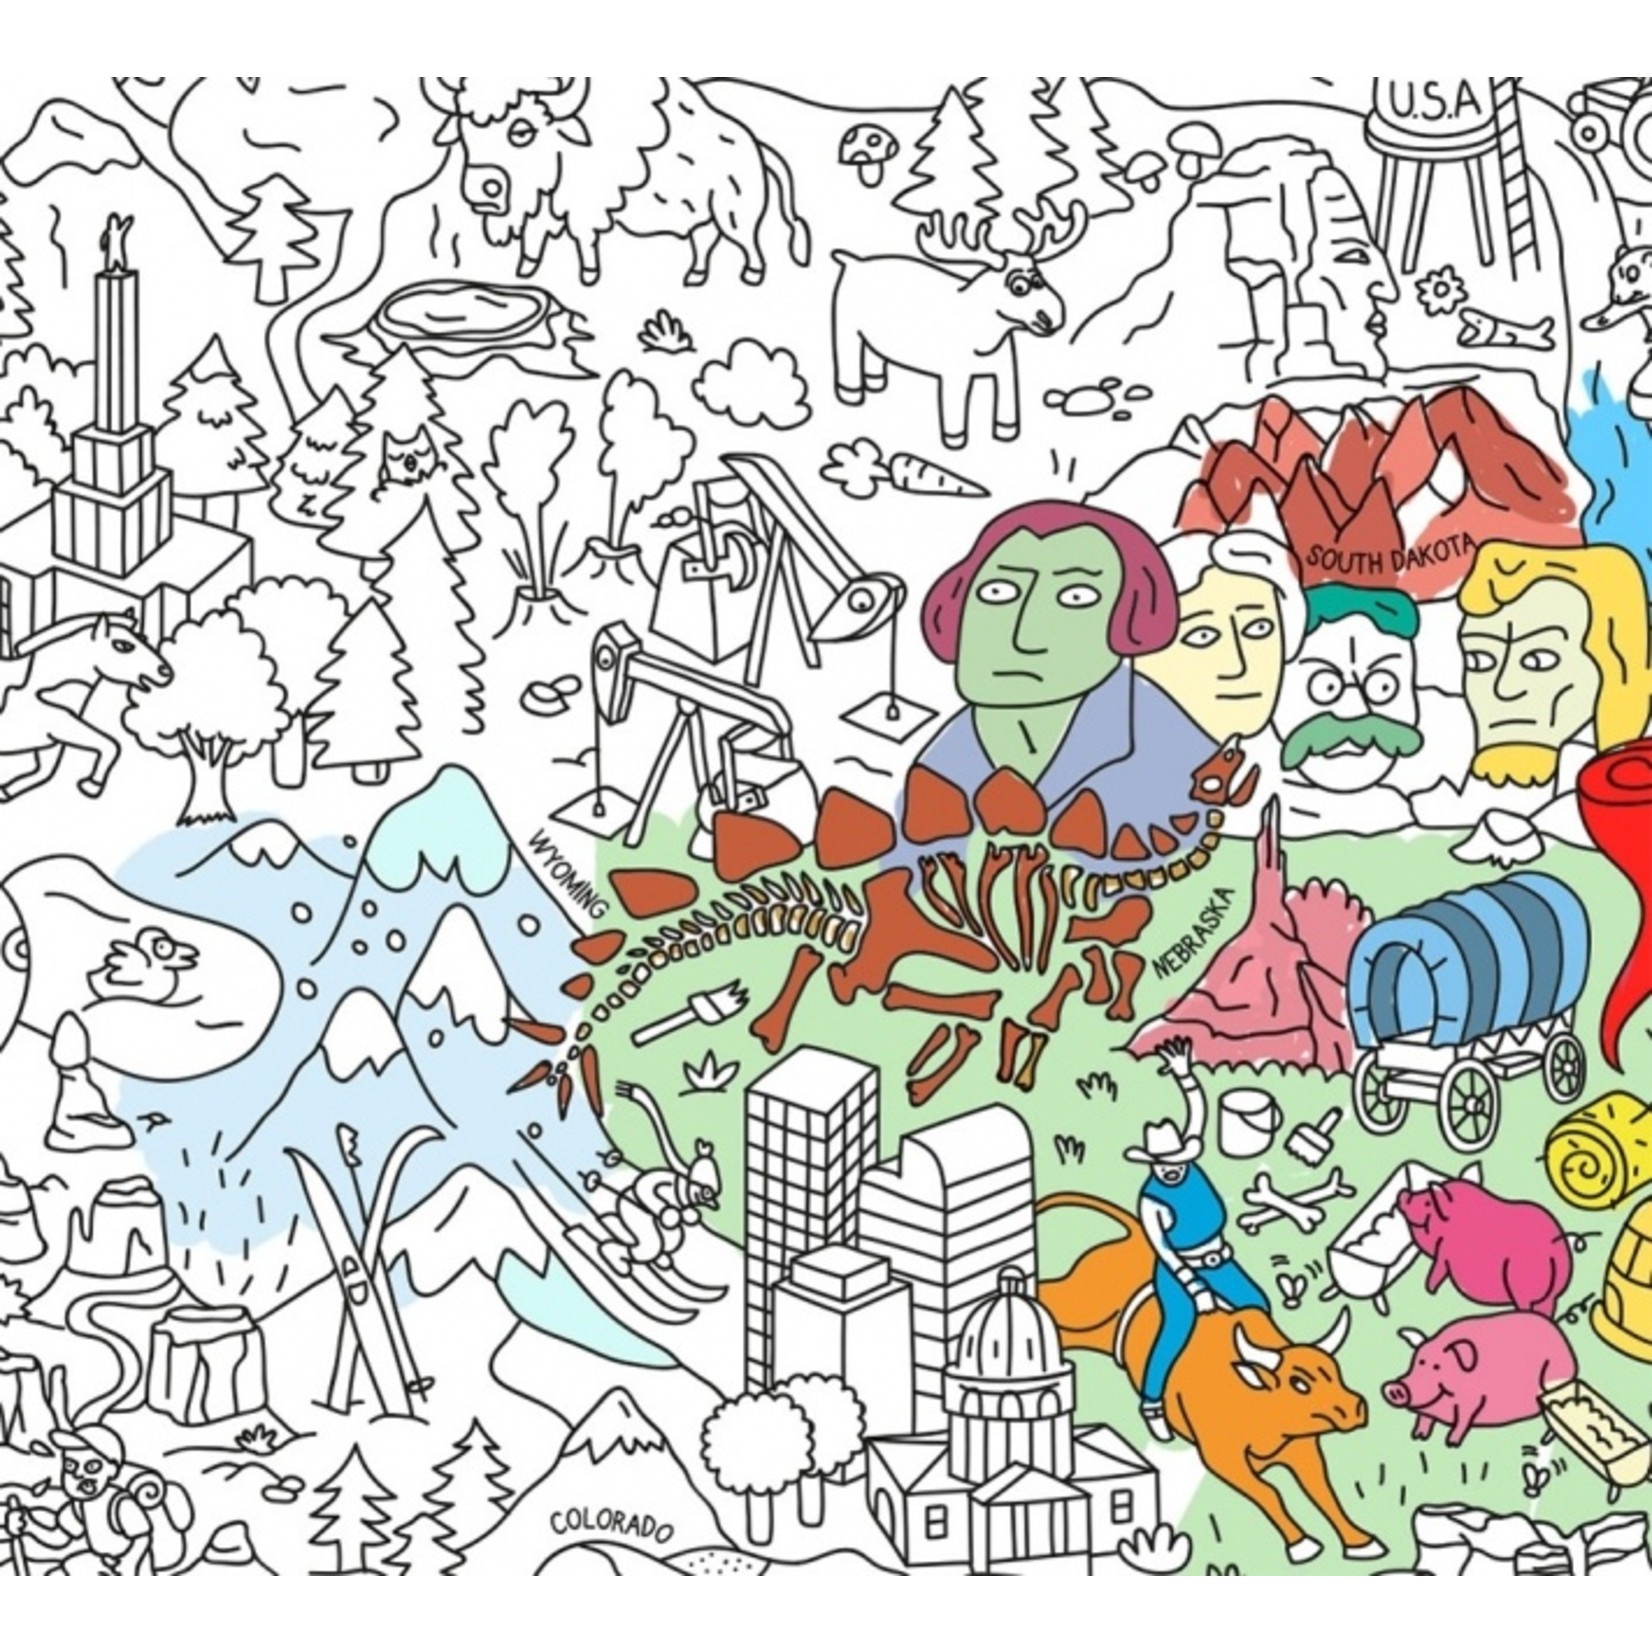 Omy Omy | Giant Coloring Poster - USA